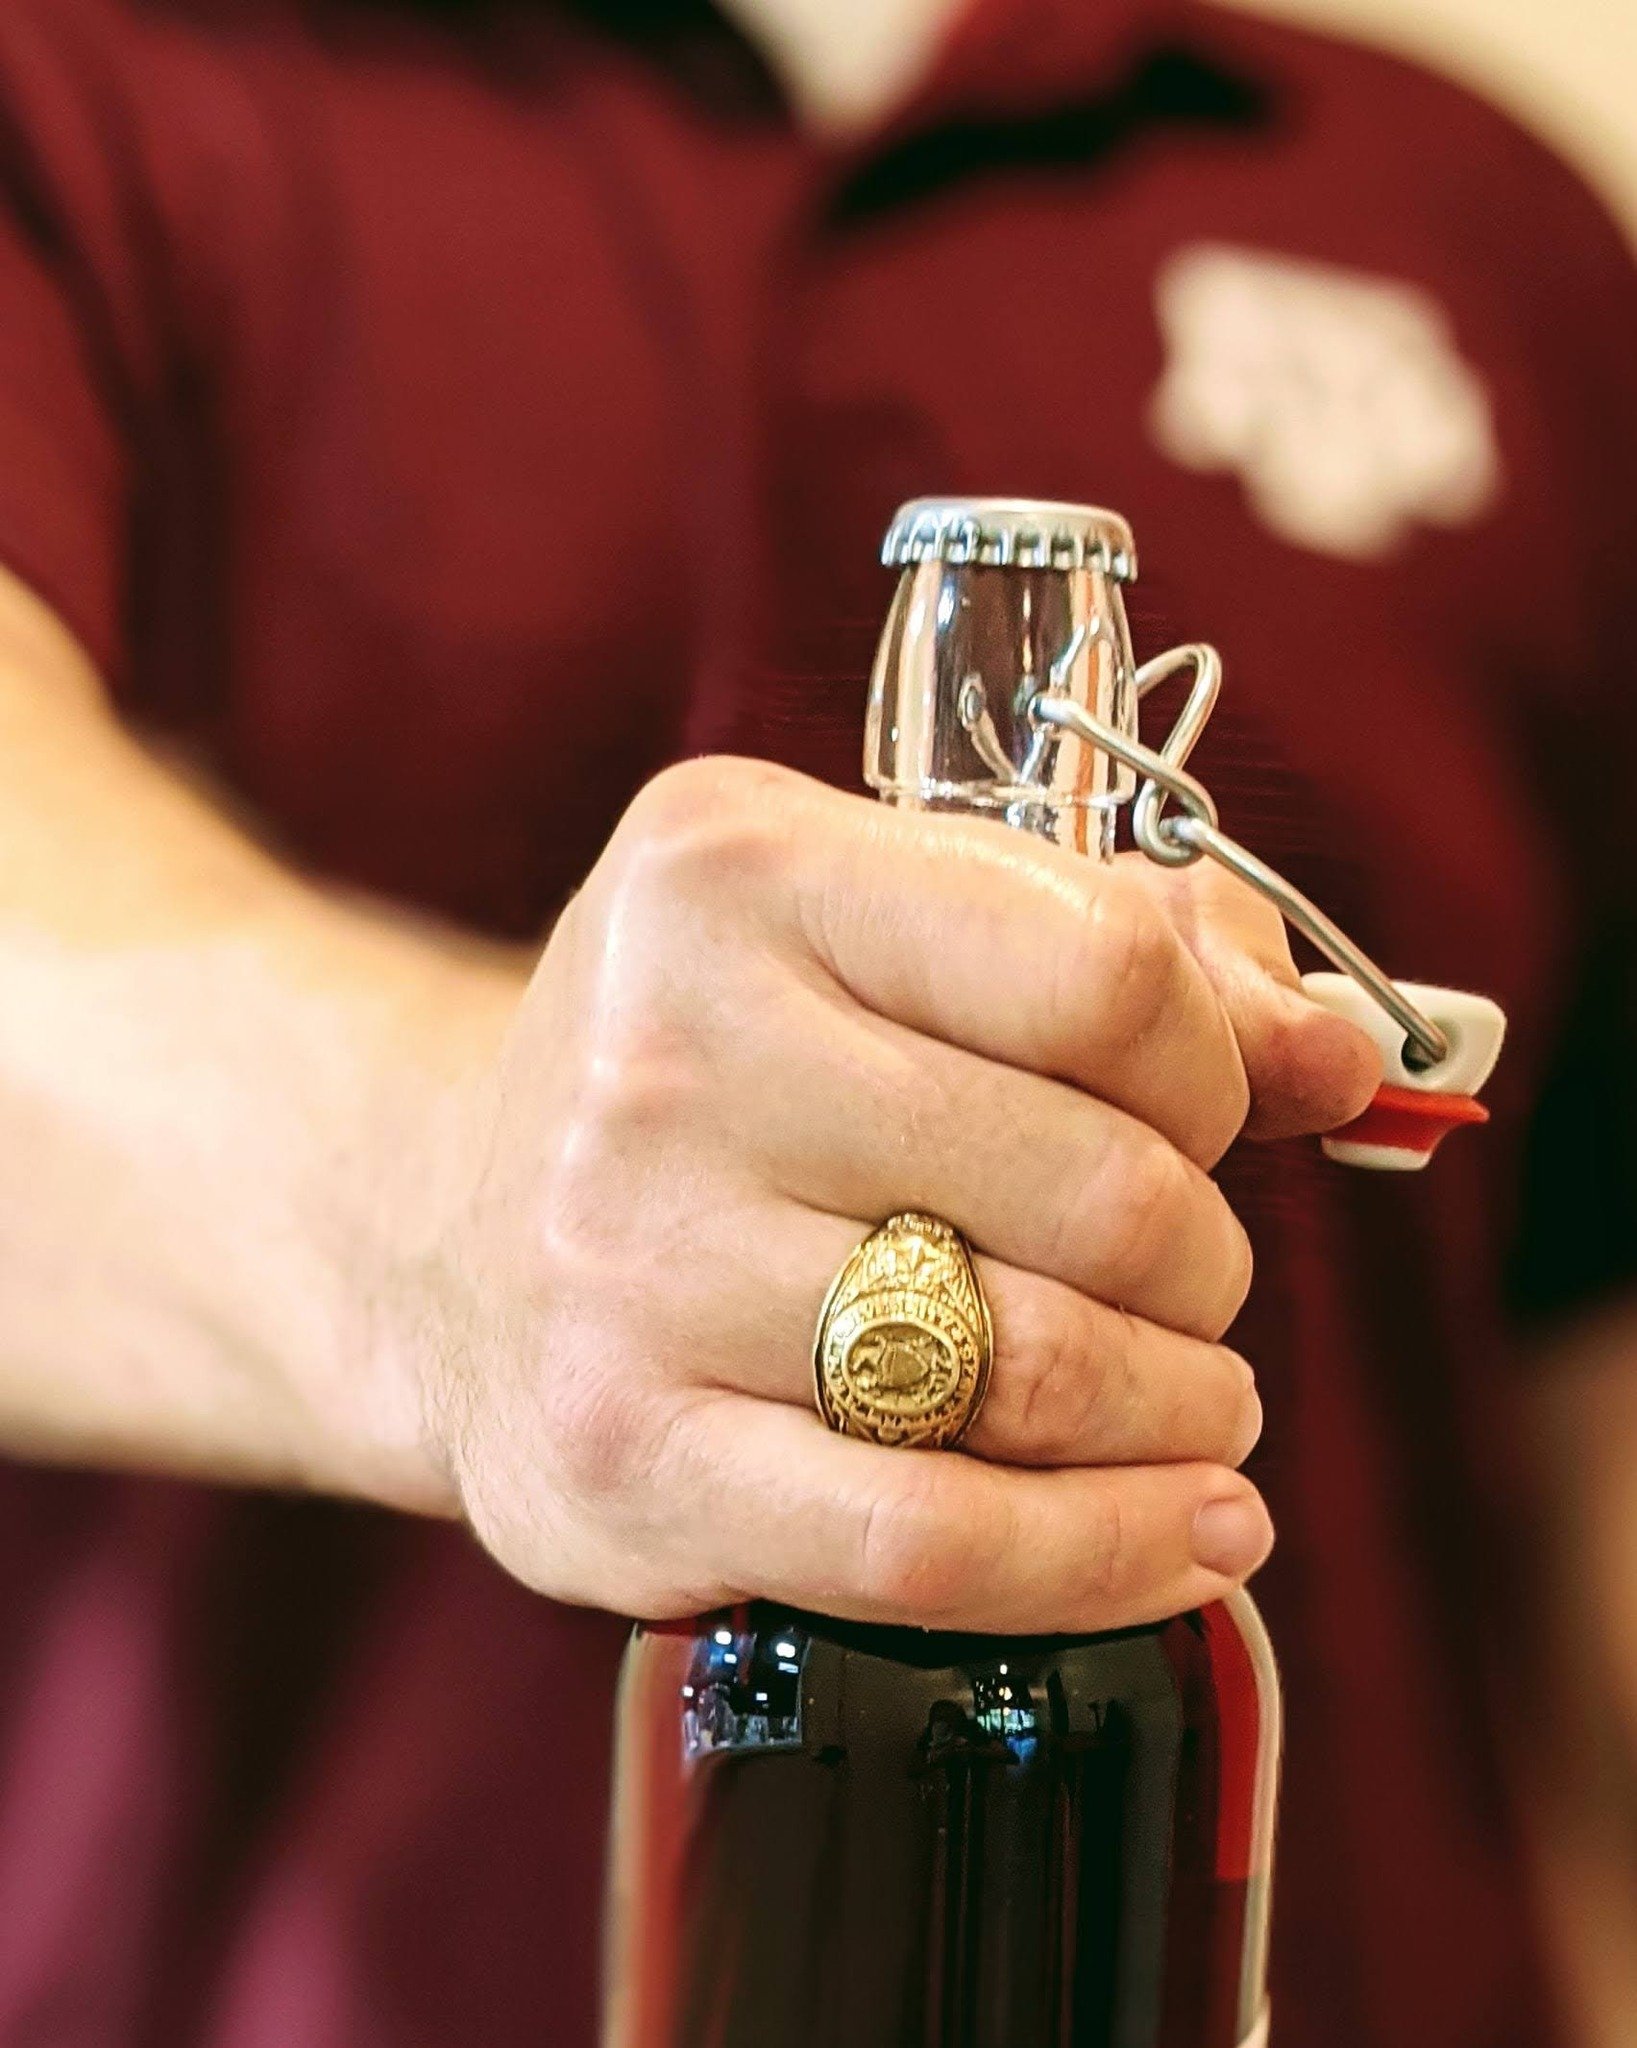 💛It's Ring Day(s) in Aggieland!👍

From the WildFlyer Aggies to everyone who got their ring this week - Congrats! 🎉

Why not celebrate with a glass of Marooned and Live Music?!?

Bring the crew for a beautiful evening in the country. 

Tasting Room